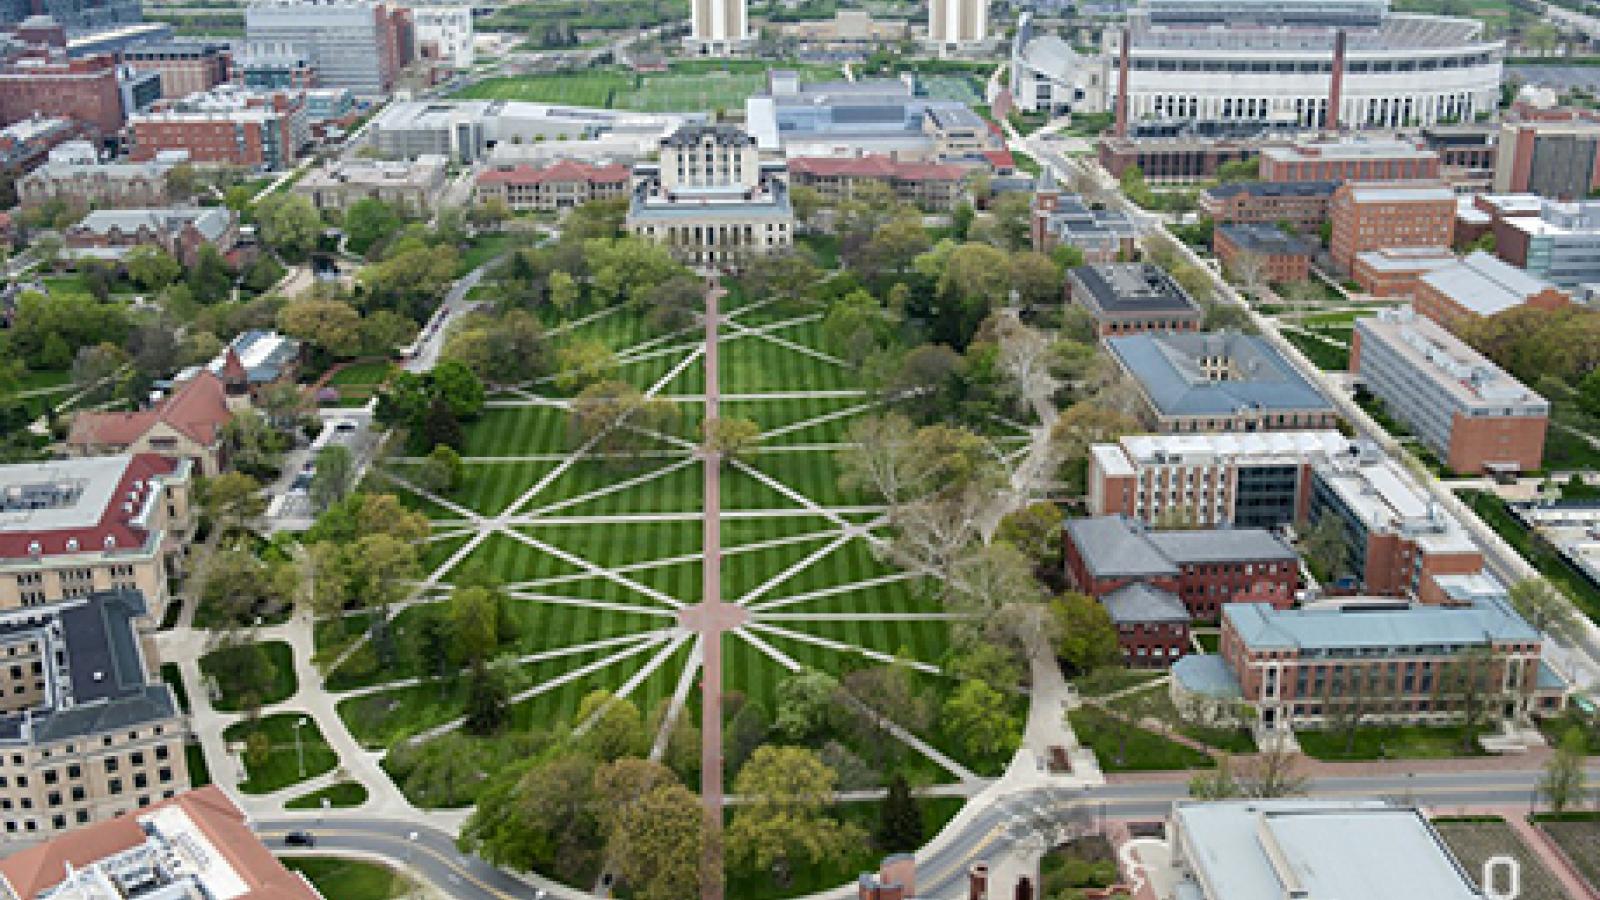 Aeriel view of the Oval Mall at Ohio State University